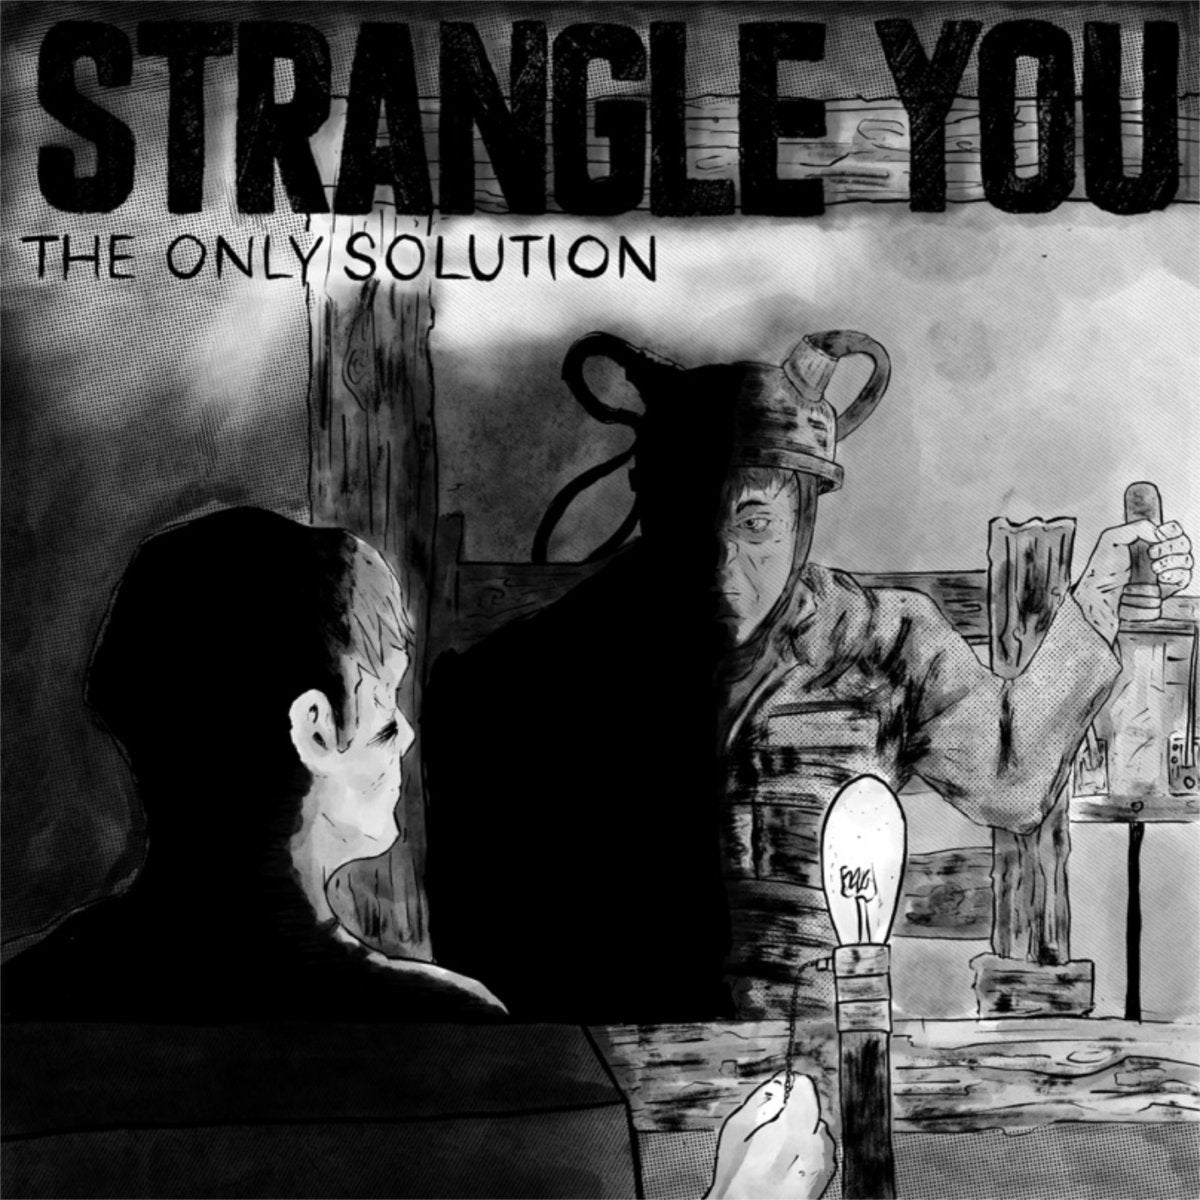 Strangle You - 'The Only Solution'